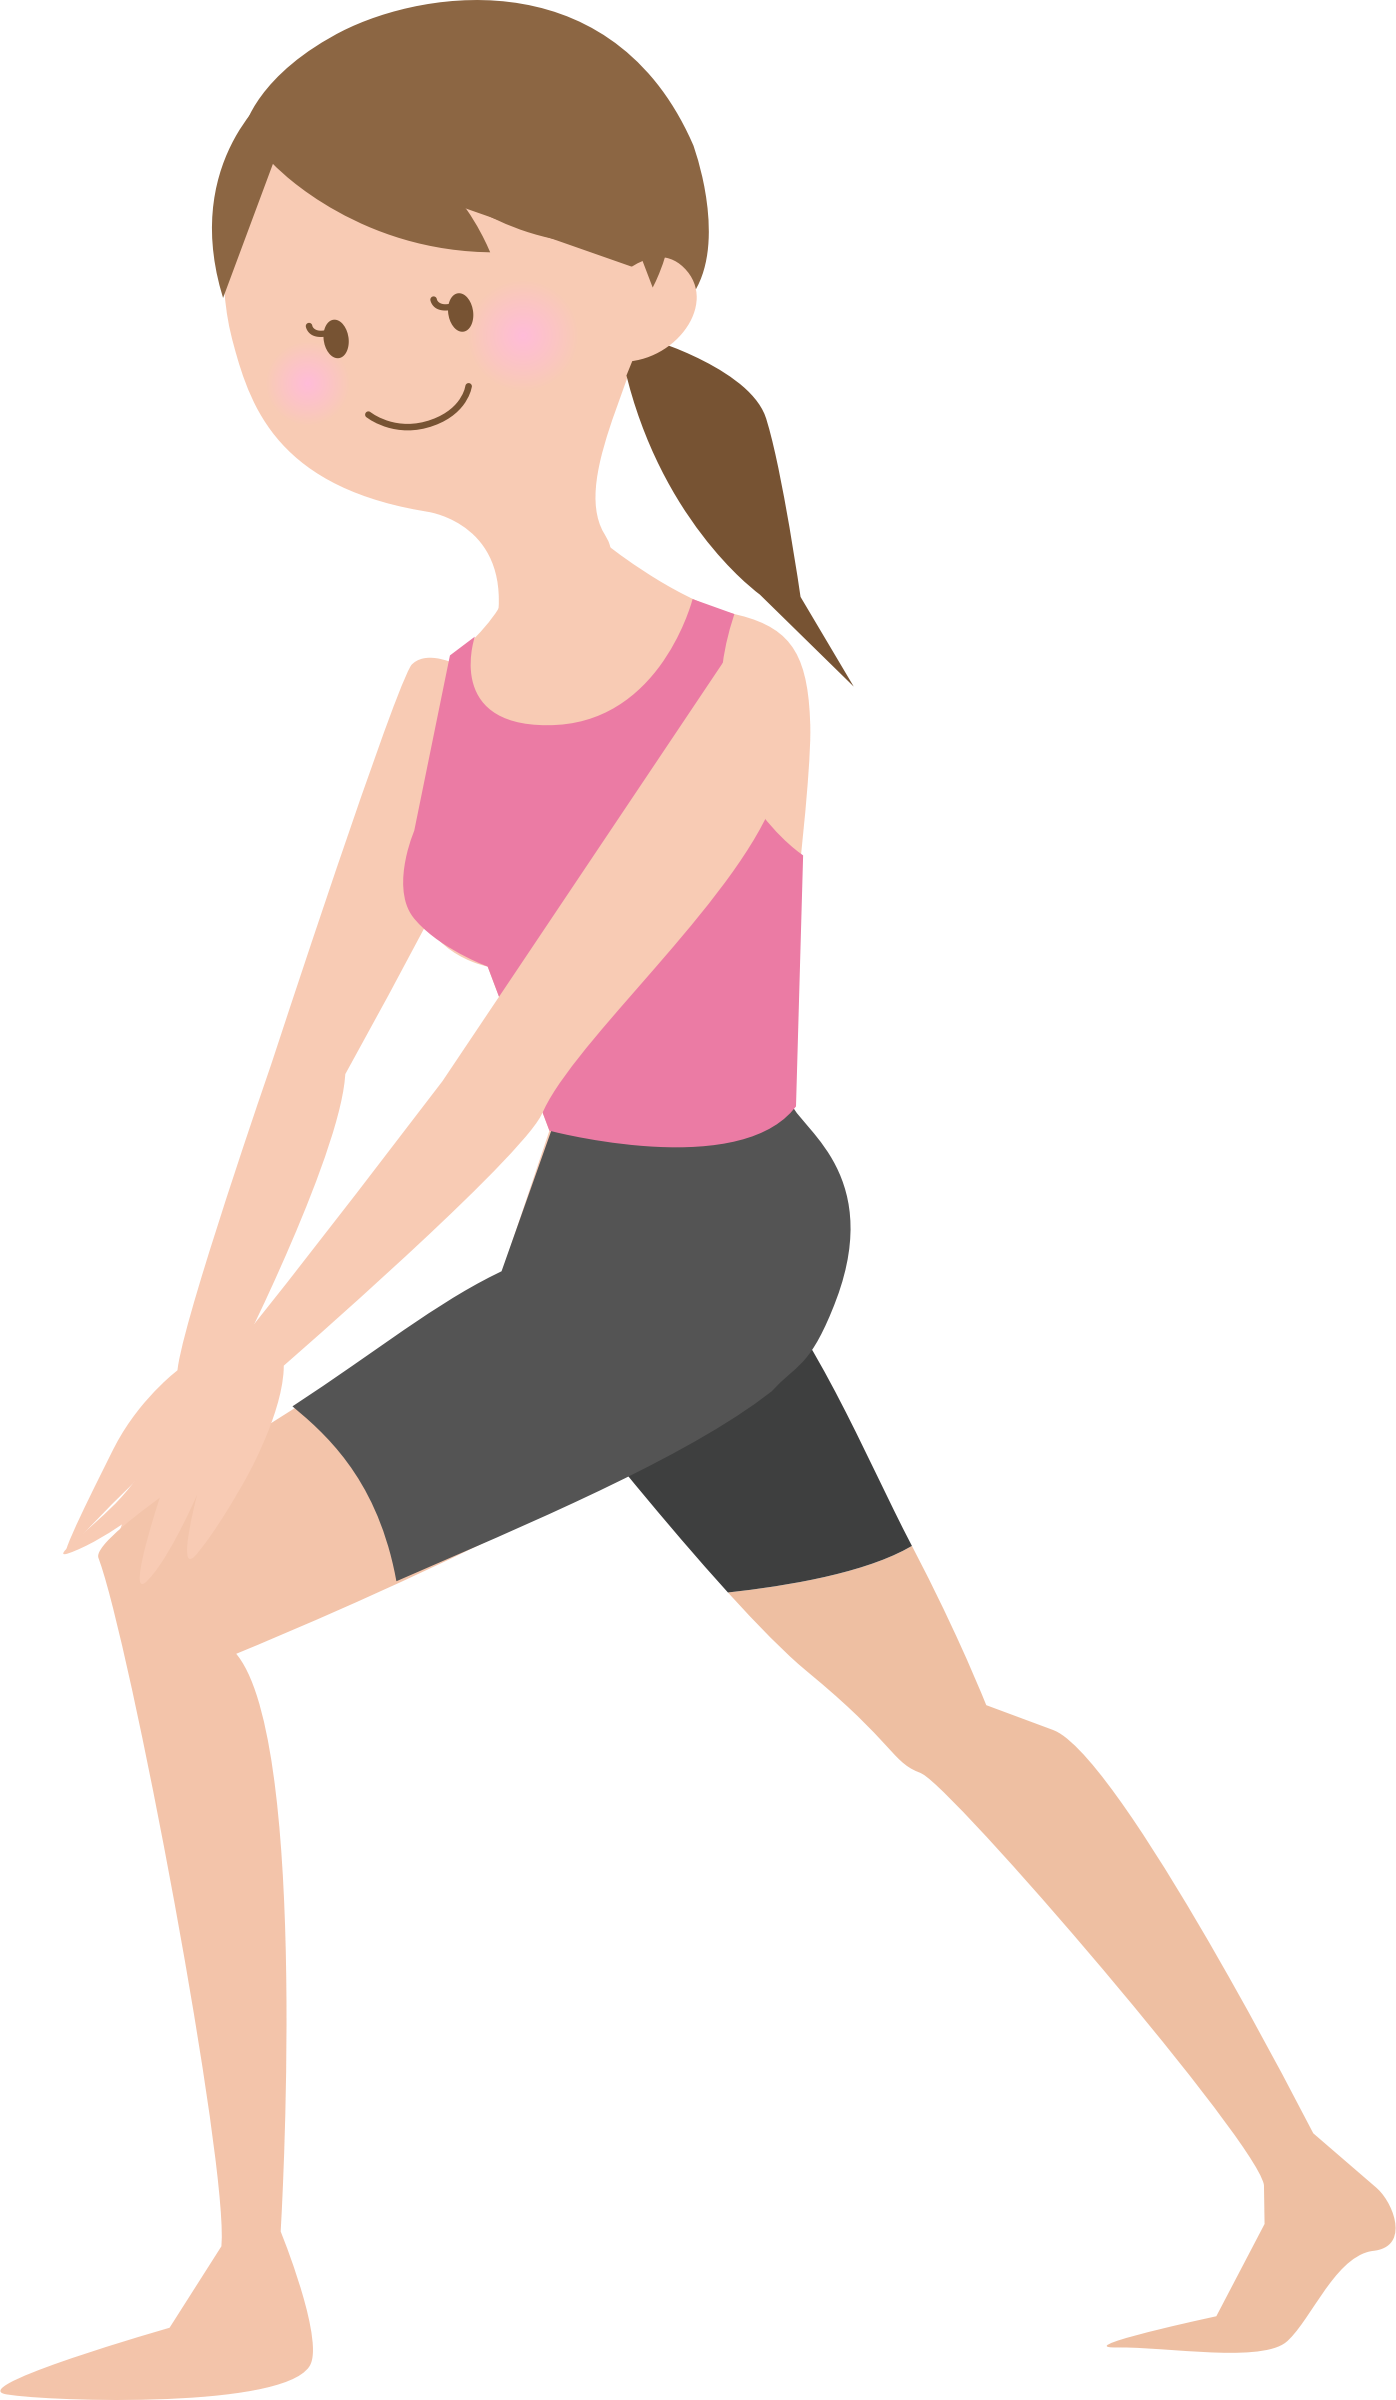 Woman stretching big image. Exercise clipart stretches